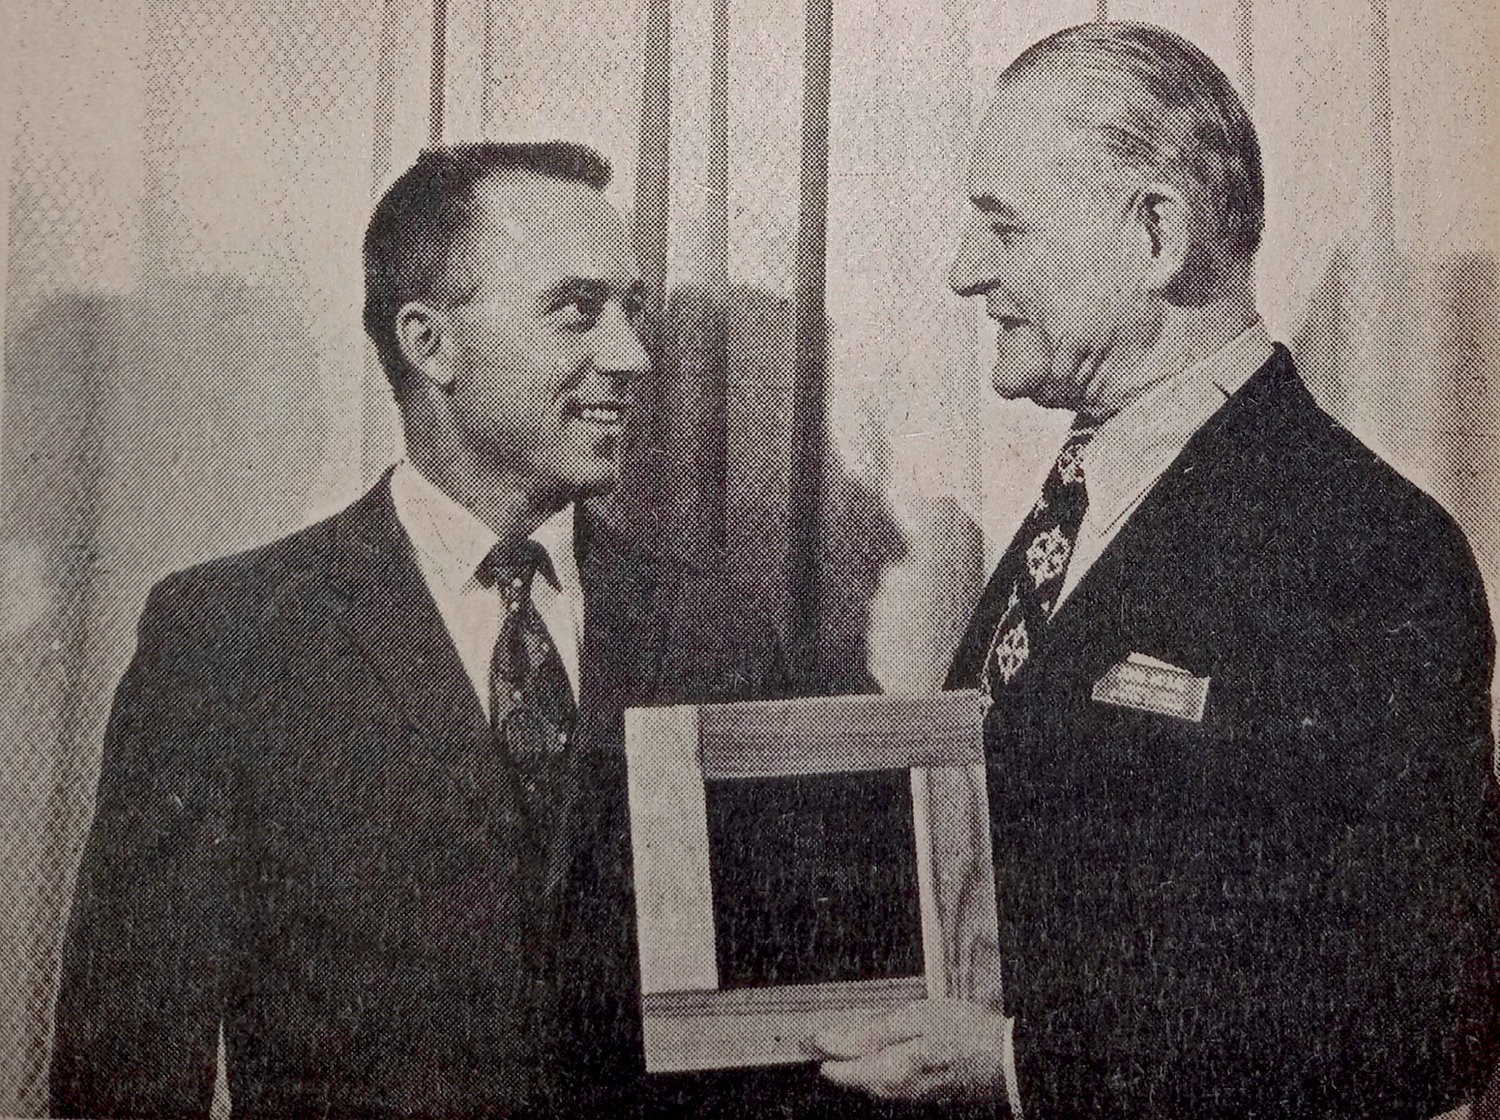 FIFTY YEARS AGO: Farmers Union Oil Company of De Smet, managed by Larry Cheney, was one of 207 cooperatives in nine states that received a 1971 Sparkle Award from Farmers Union Central Exchange. John McKay, right, marketing division director for the regional supply co-op, presented the award to Cheney, left. This is the fifth time the De Smet station has won the award.